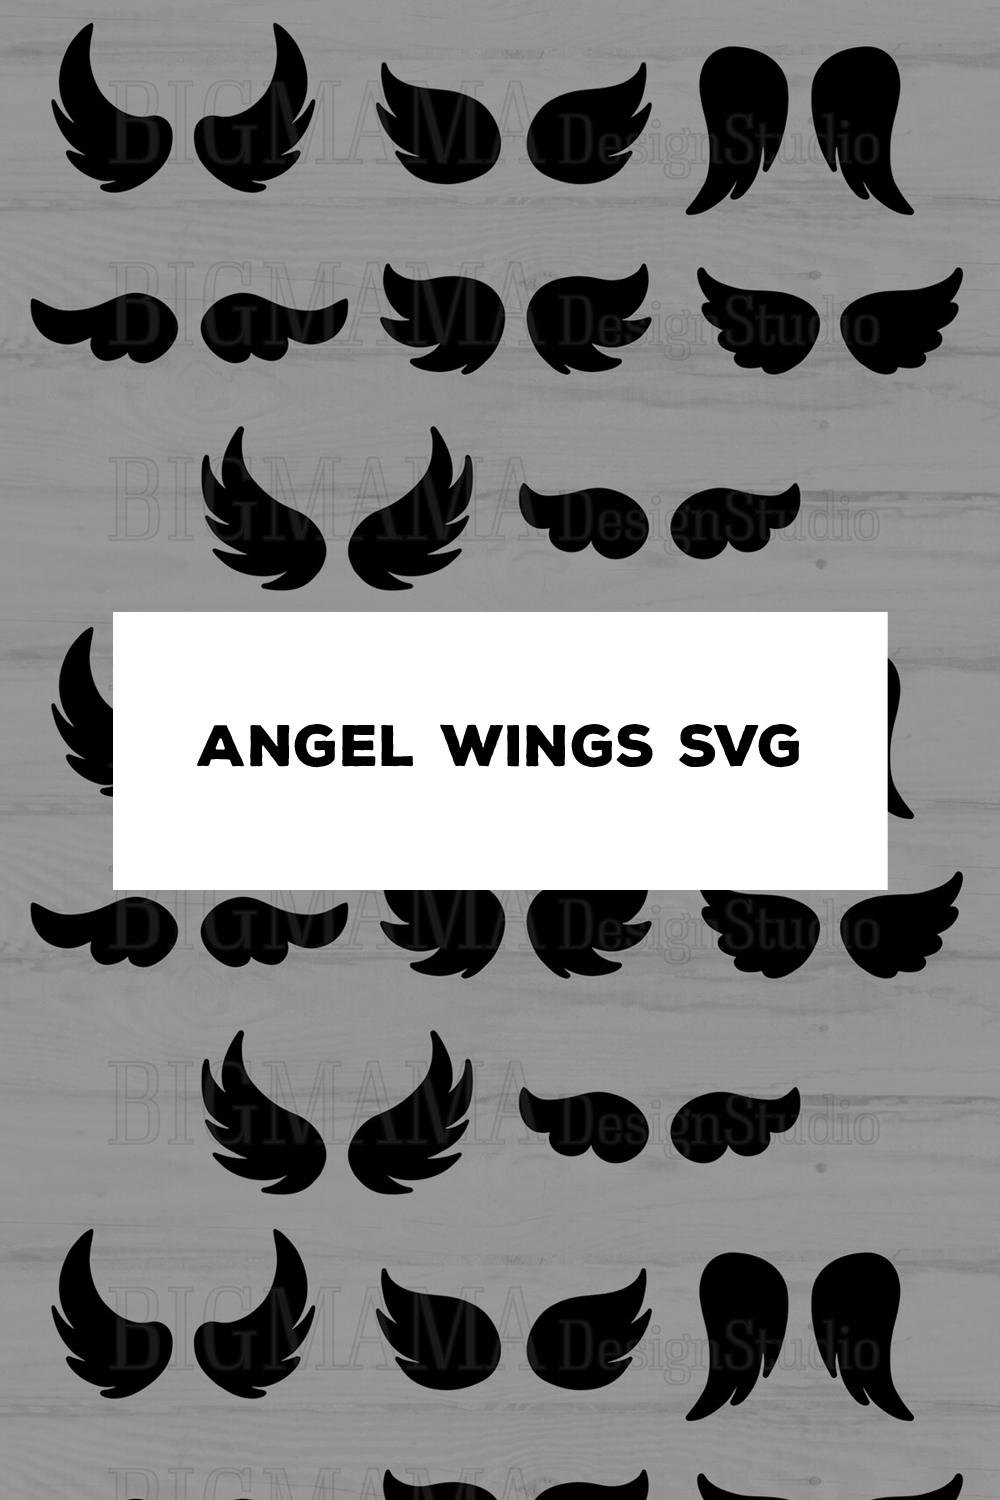 Preview images with angel wings.